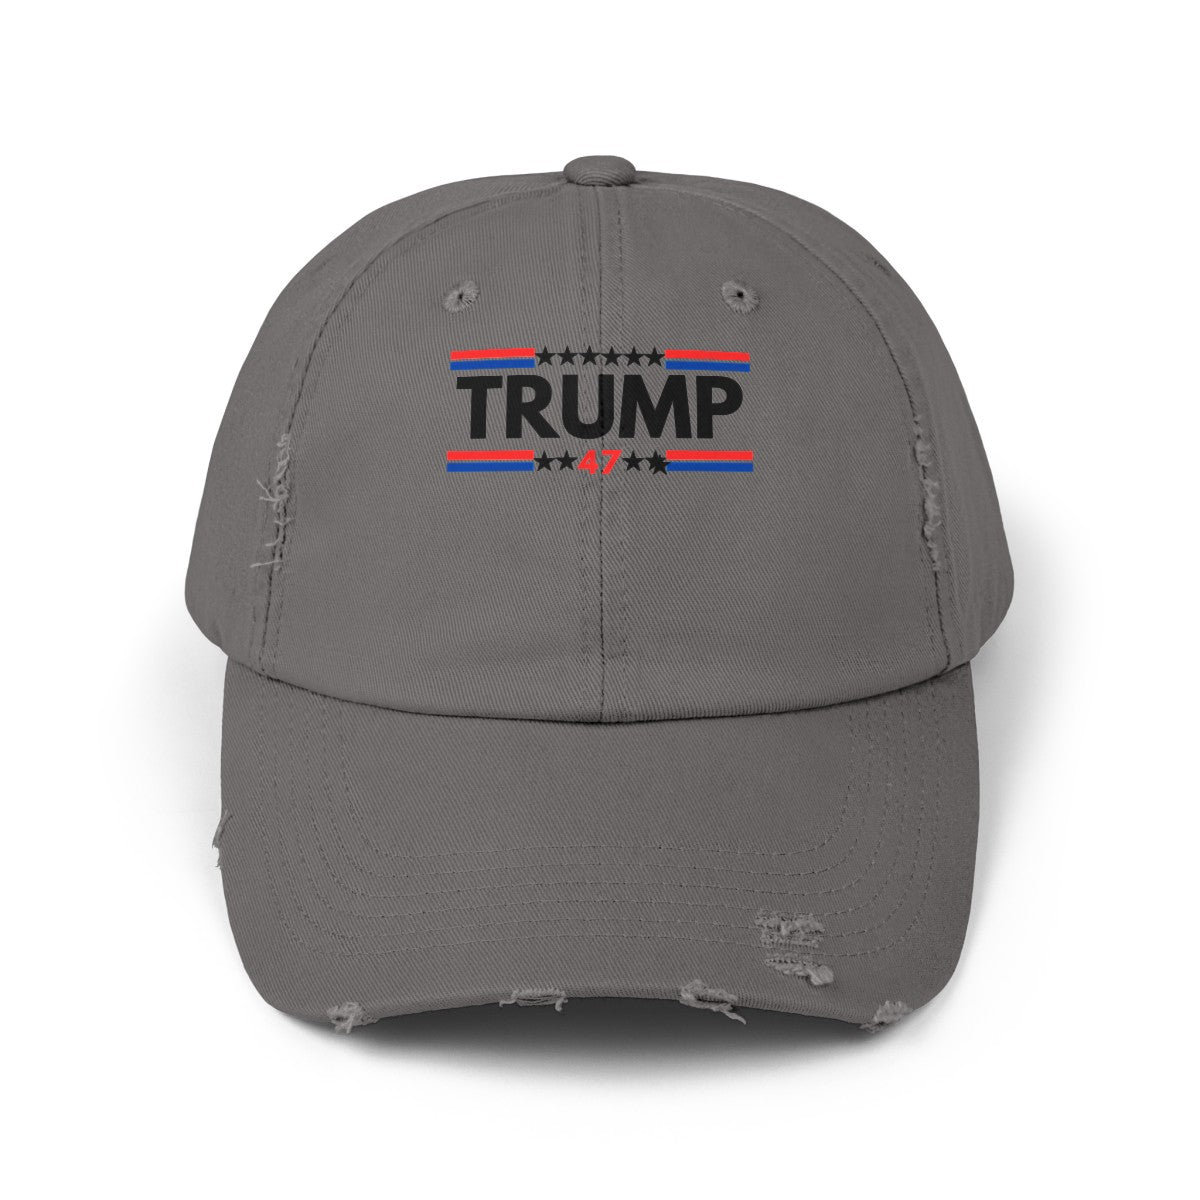 Get trendy with Trump #47 President  Cap -  available at Good Gift Company. Grab yours for $21.98 today!